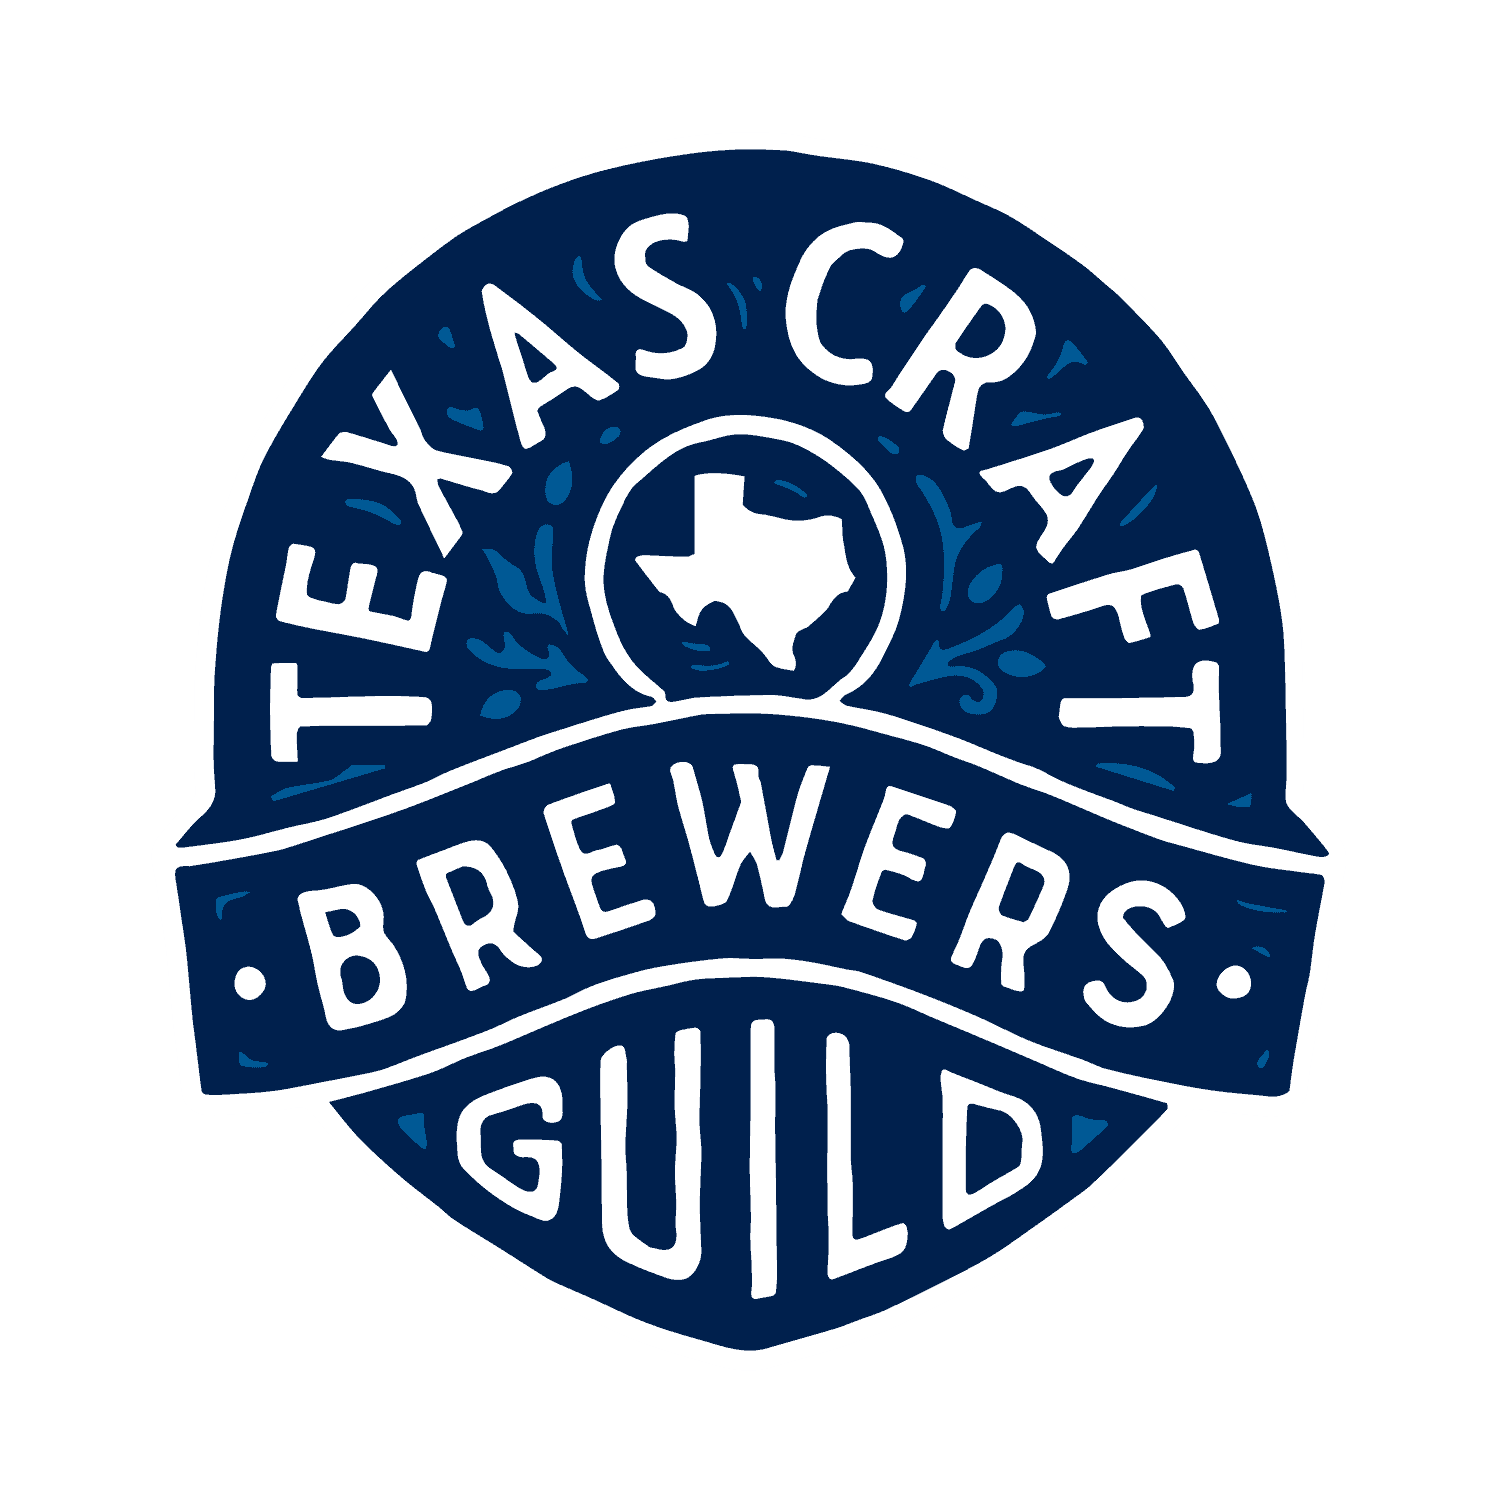 craft brewers guild